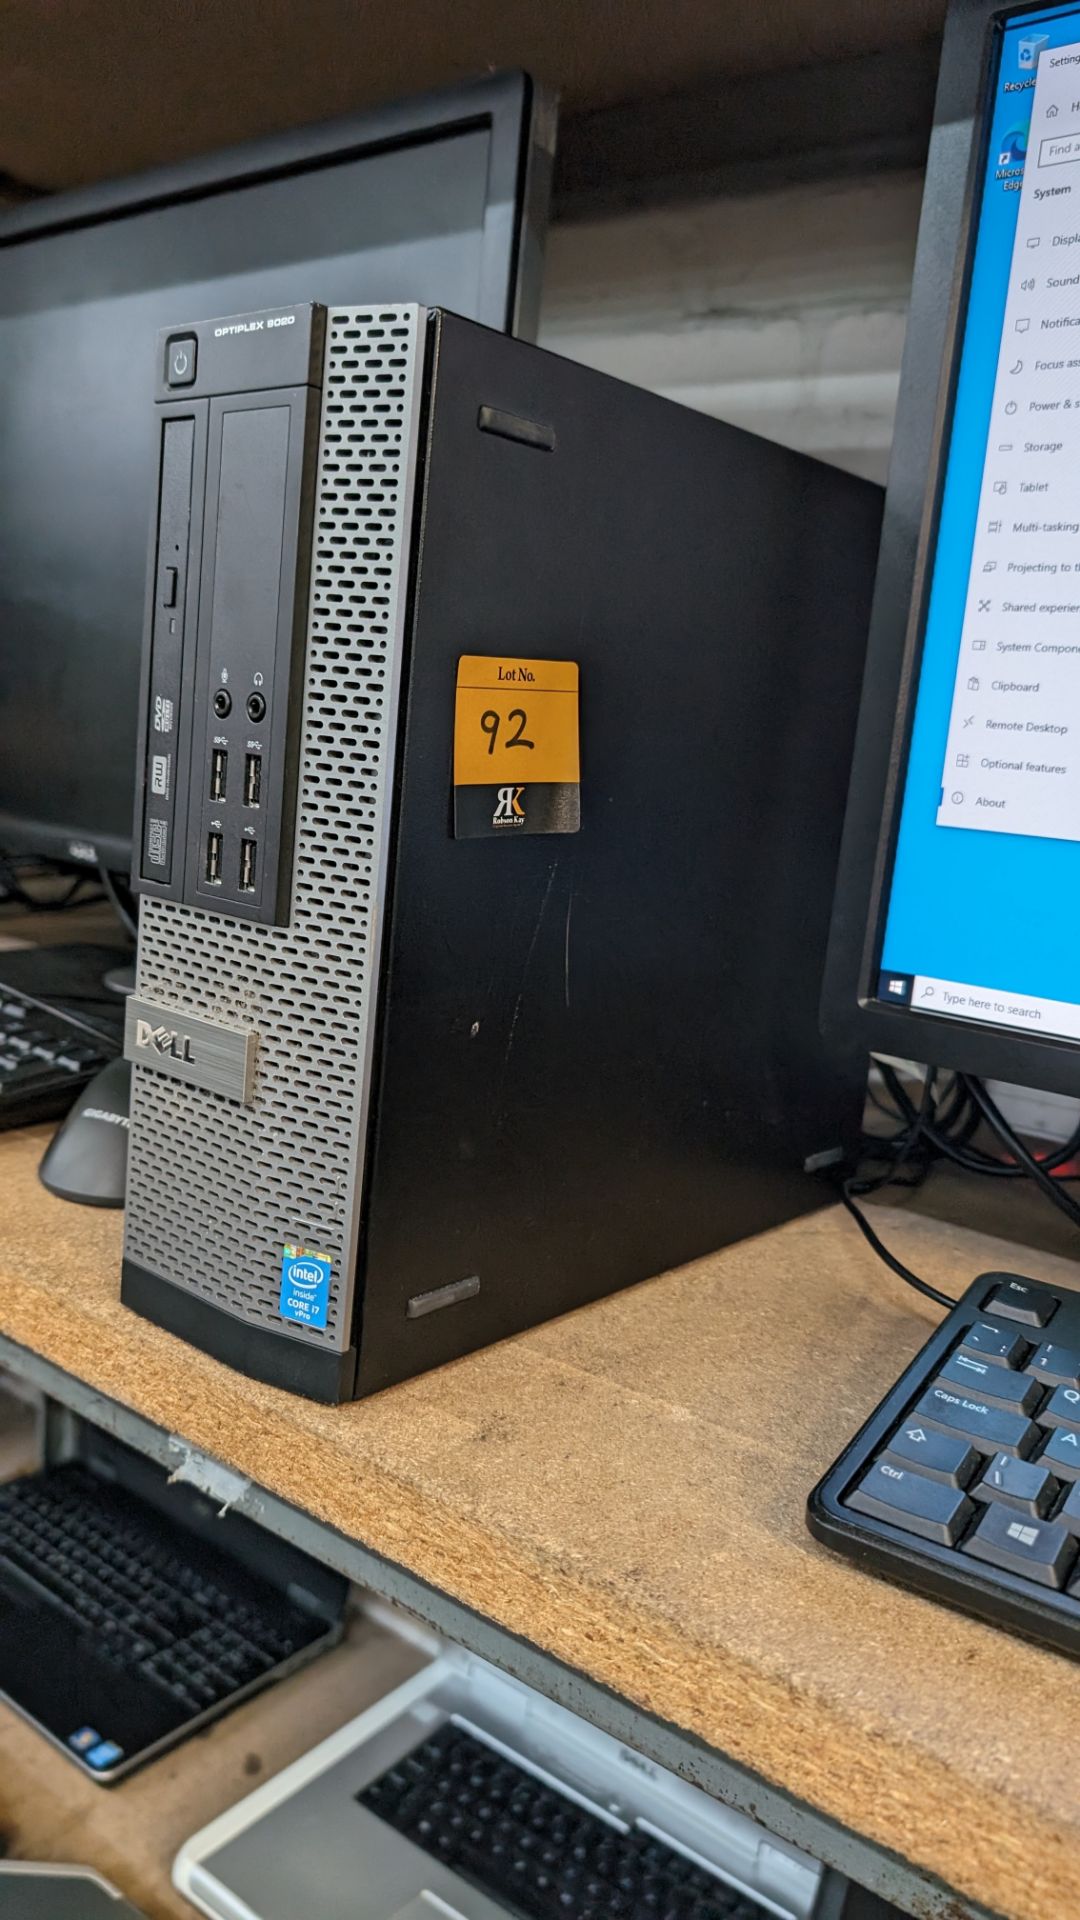 Dell Optiplex 9020 compact tower computer with Intel i7 vPro processor, including widescreen monitor - Image 15 of 18